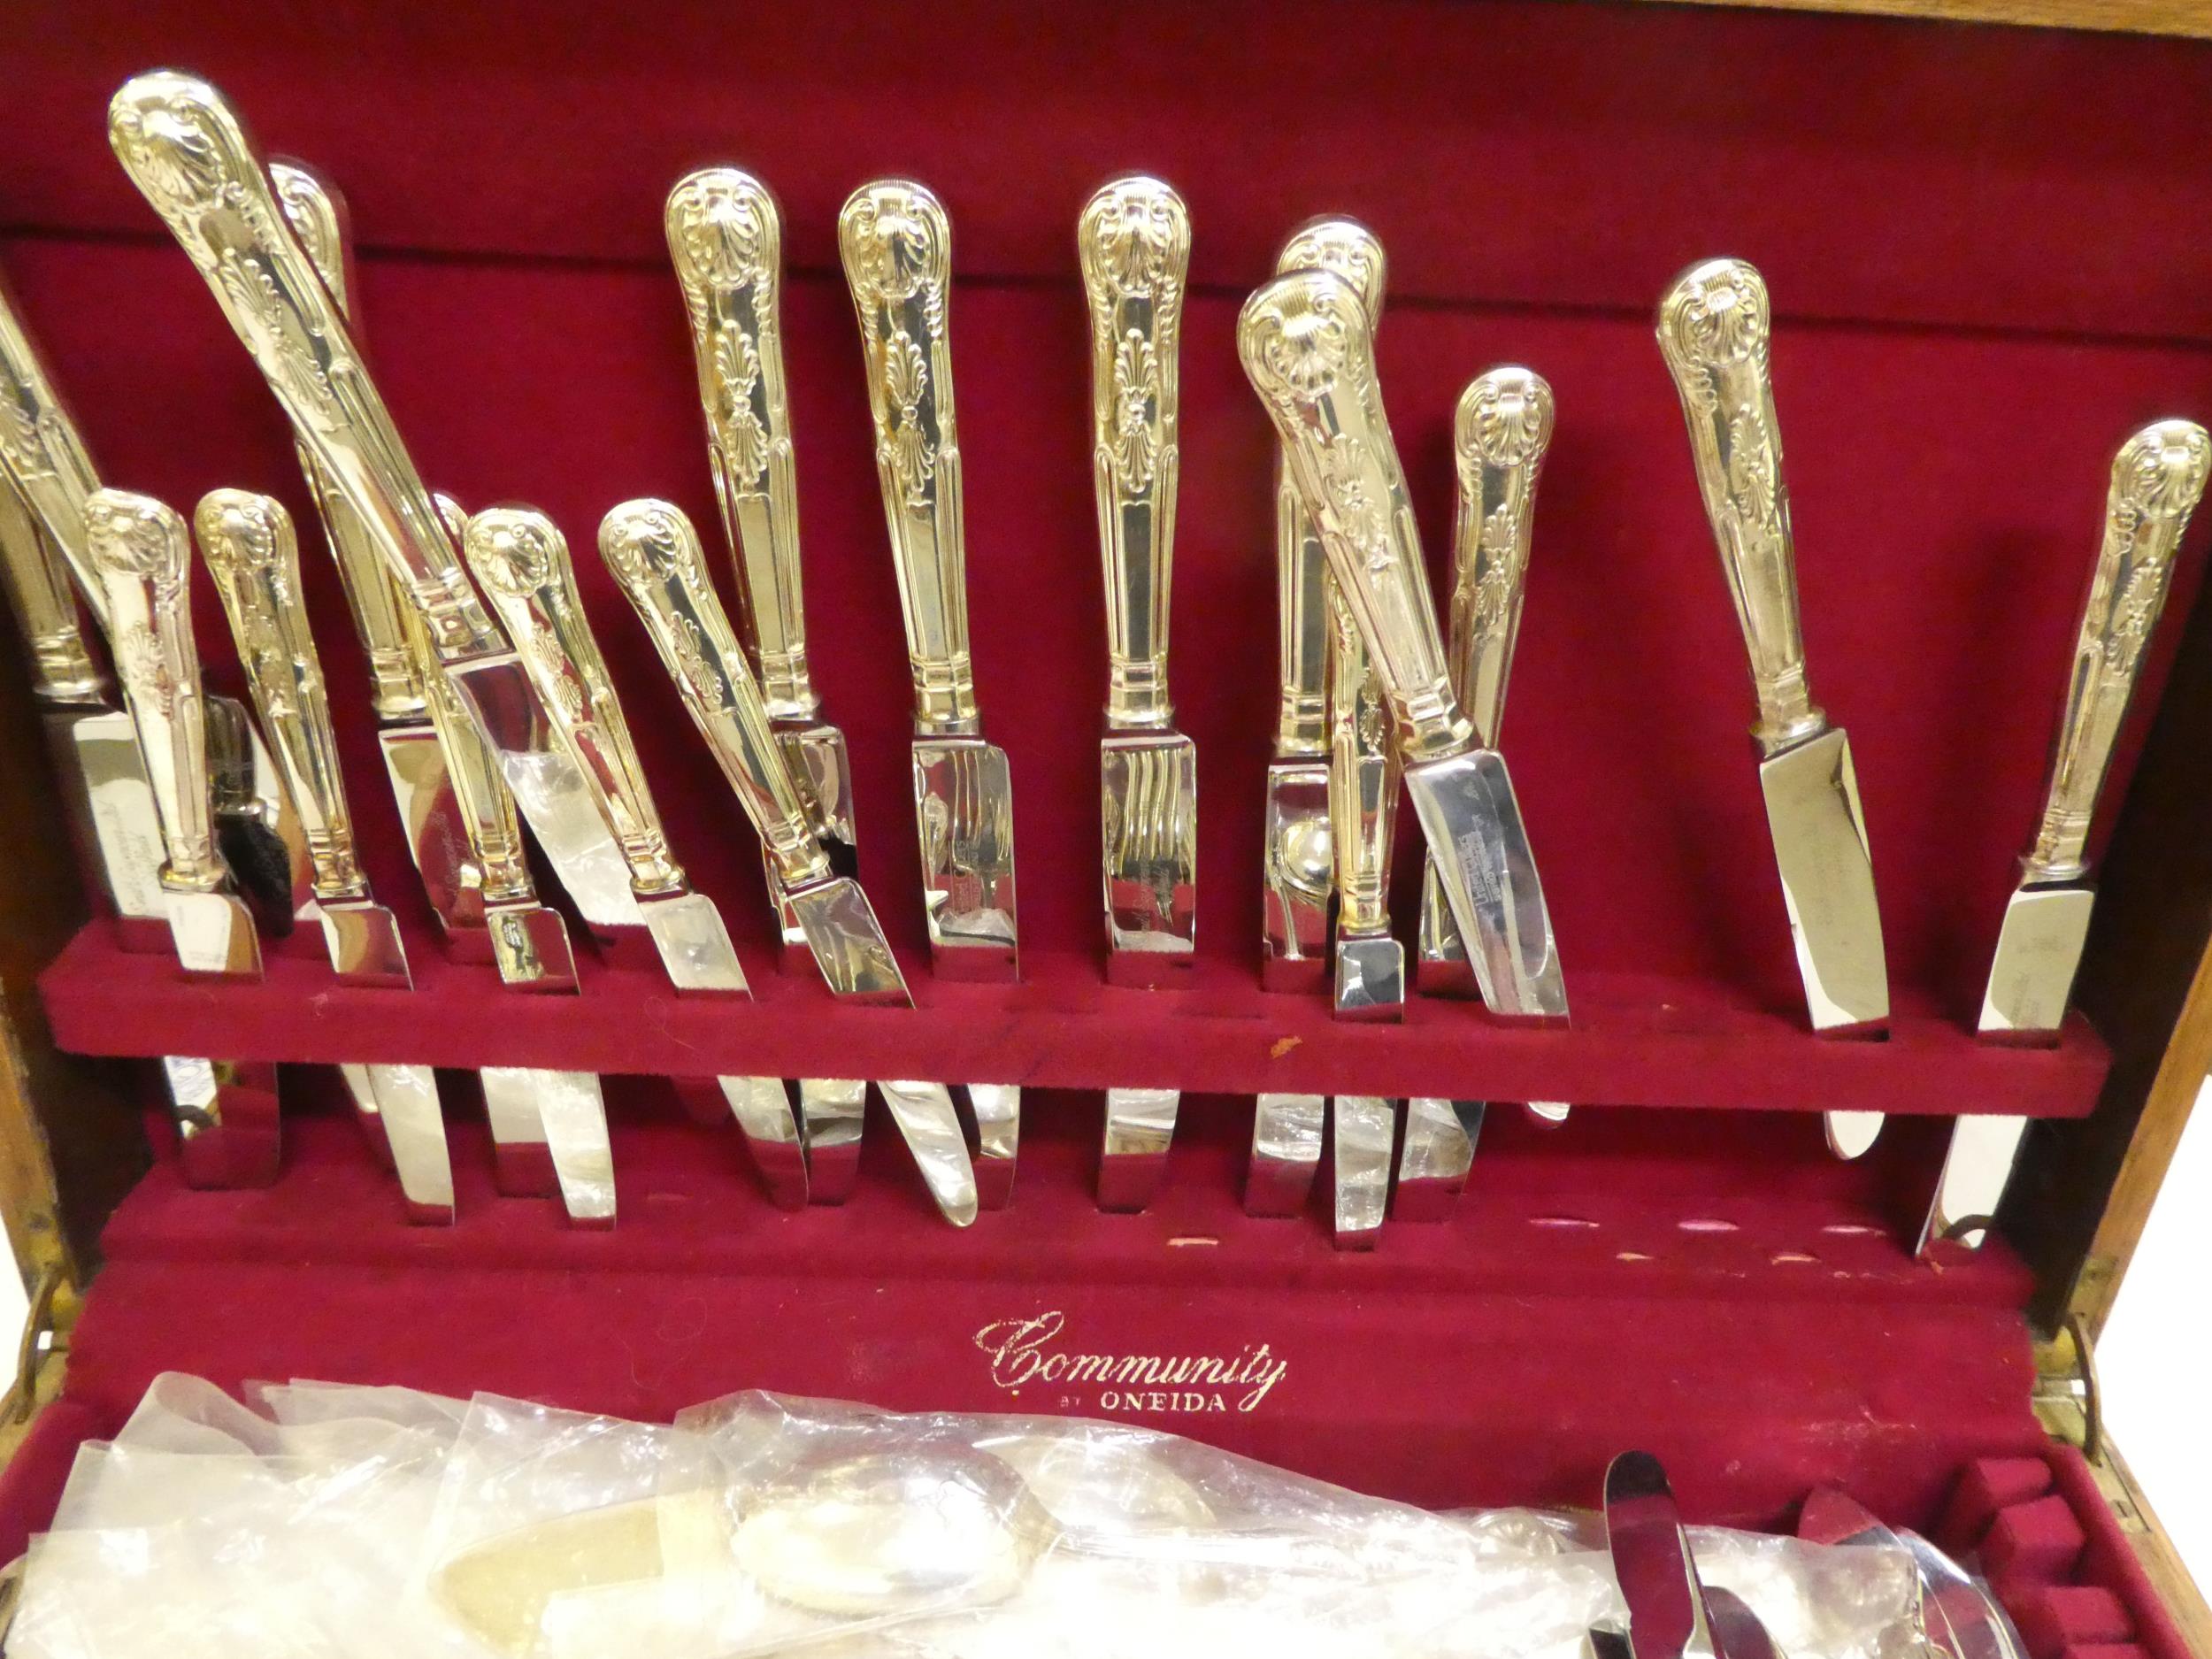 United Cutlers of Sheffield silver plated and stainless Kings pattern cutlery and flatware, in a - Image 3 of 3